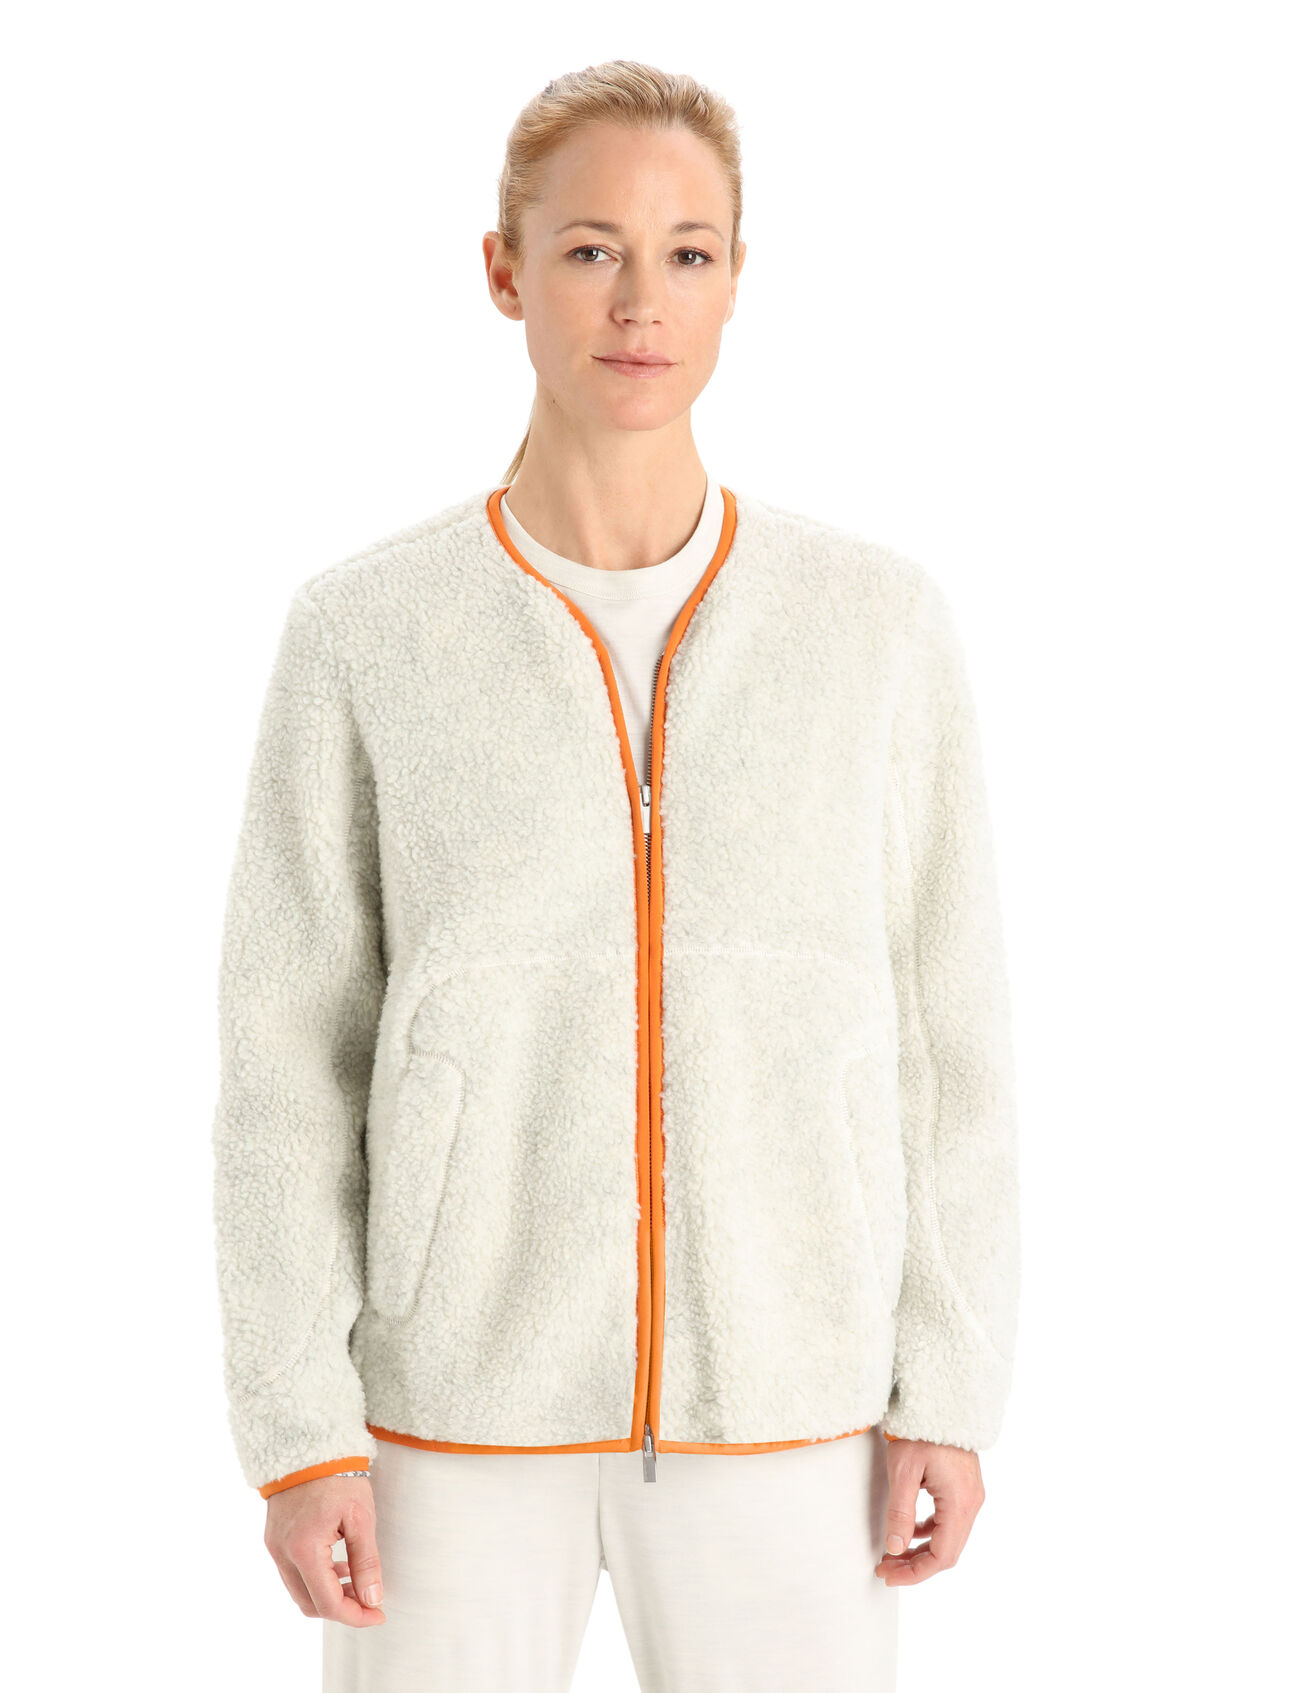 Womens RealFleece™ Merino High Pile Long Sleeve Zip Cardigan Combining a classic outdoor feel with a sweater silhouette and the natural benefits of merino wool, the RealFleece™ High Pile Long Sleeve Zip Cardigan is a warm, stylish and ultra-comfortable fleece ideal for urban adventures.